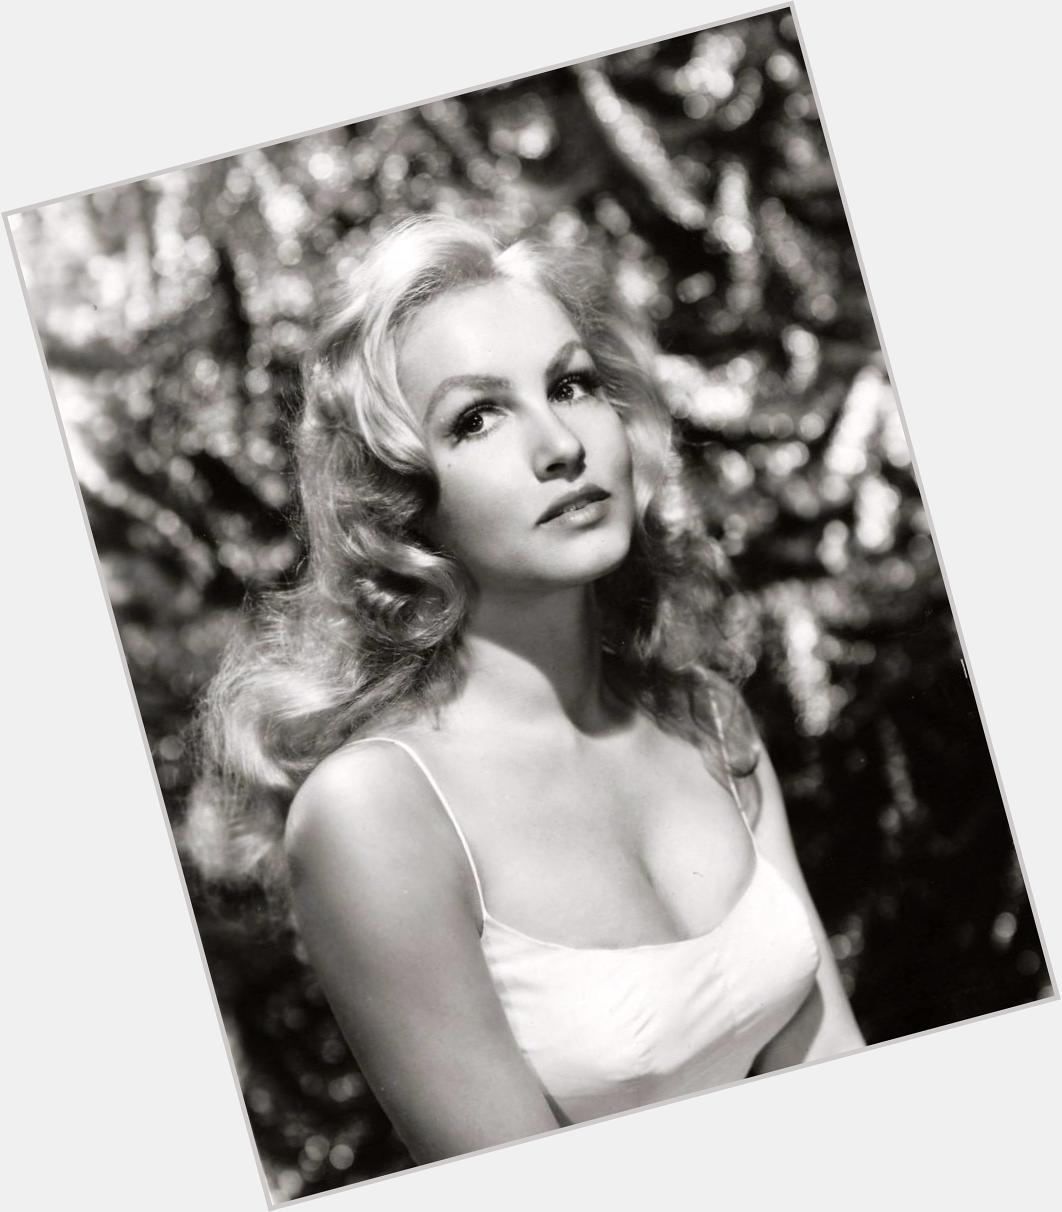 Happy Birthday to stunning Julie Newmar, the greatest 